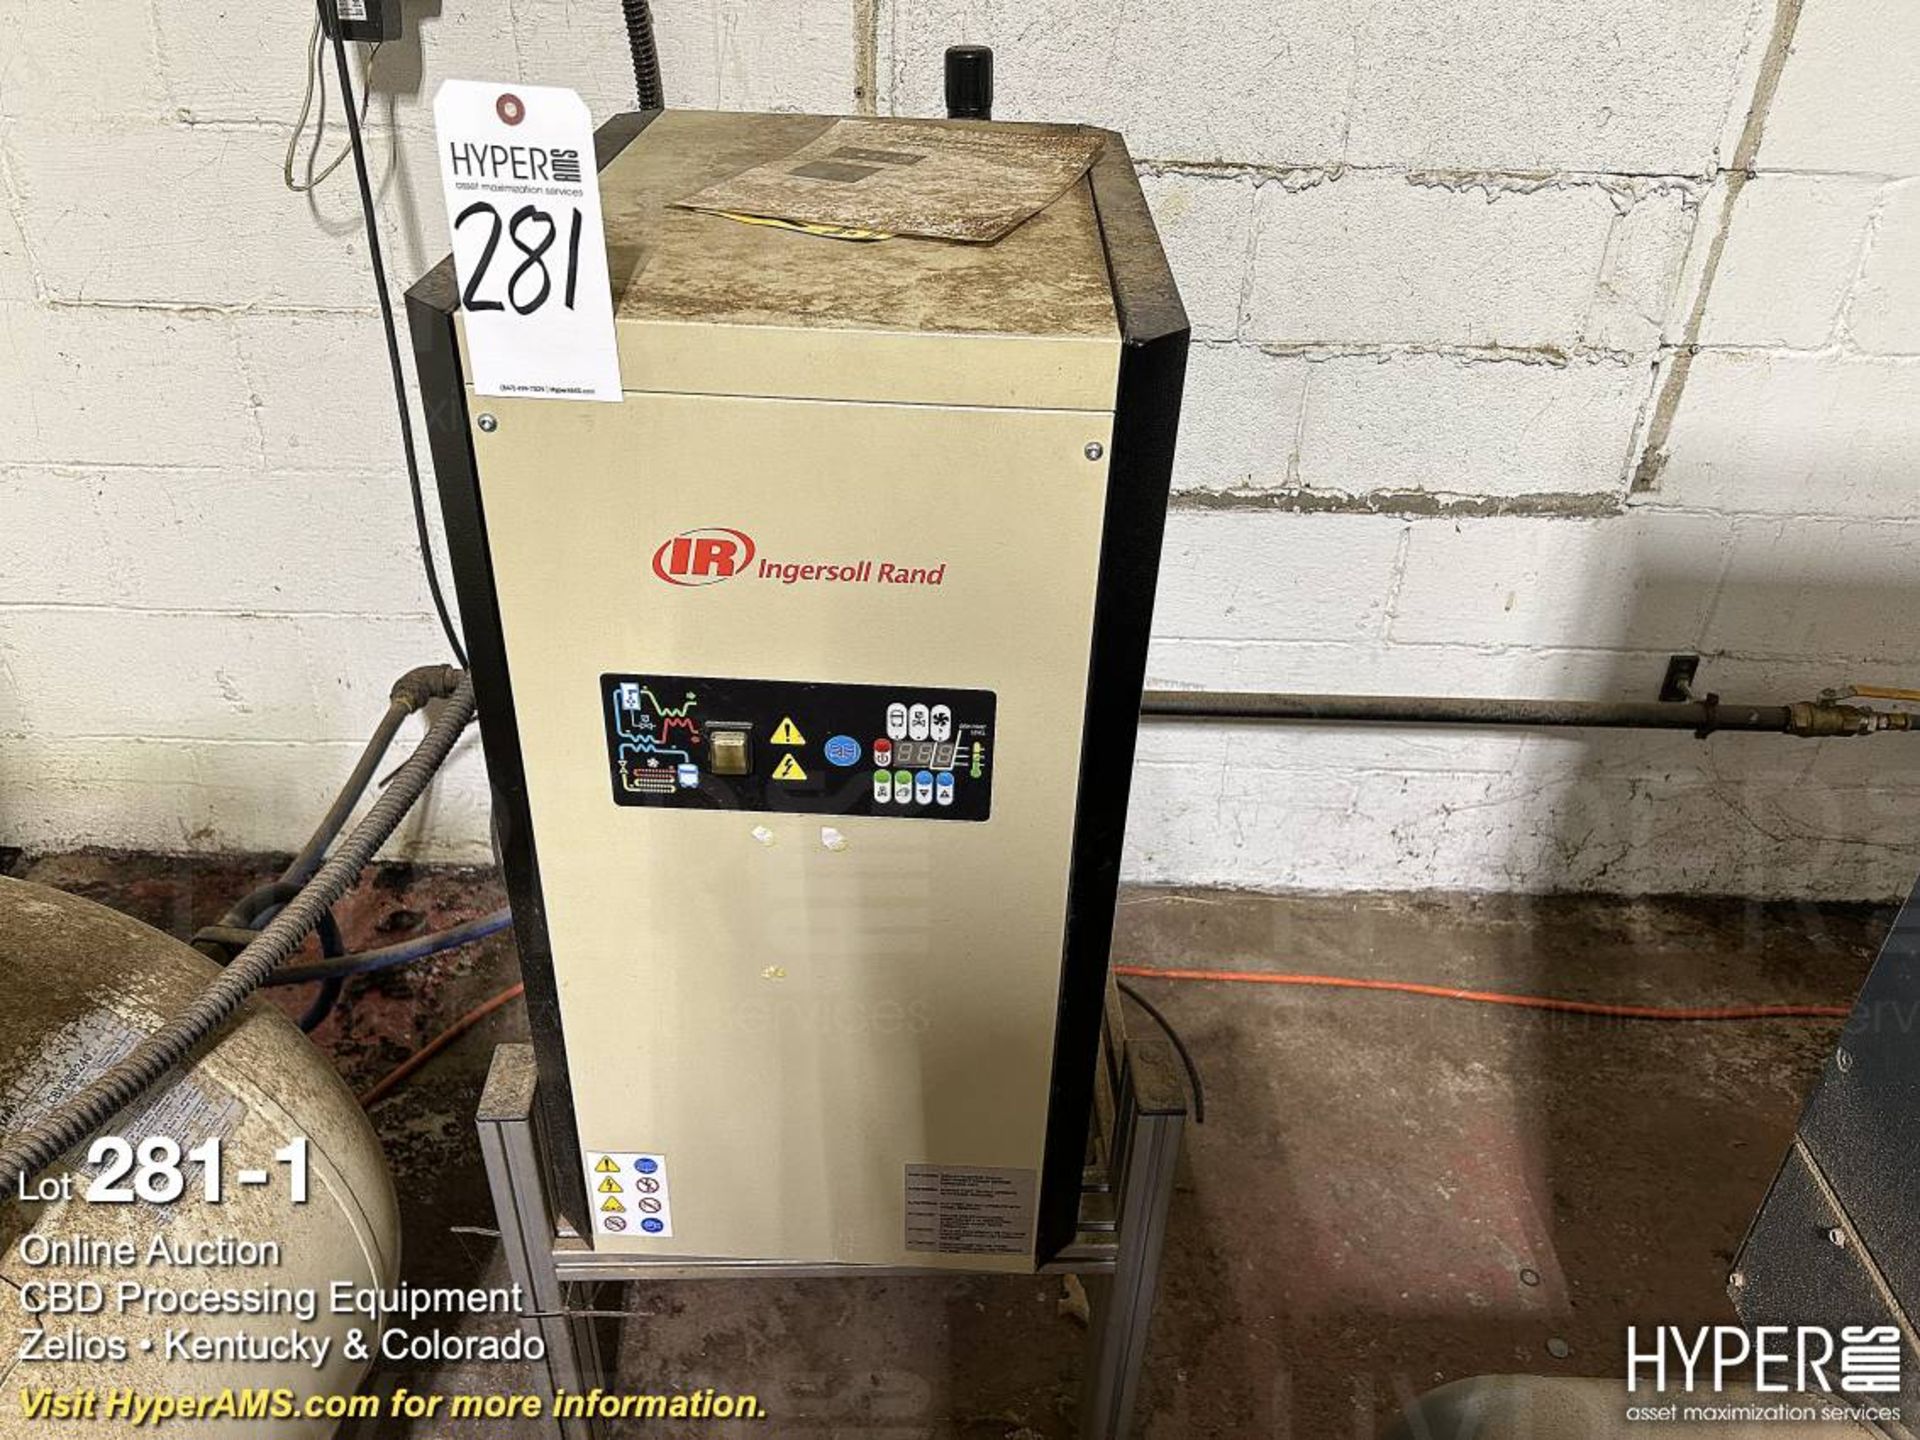 Ingersoll Rand Model D102IT Refrigerated Air Dryer